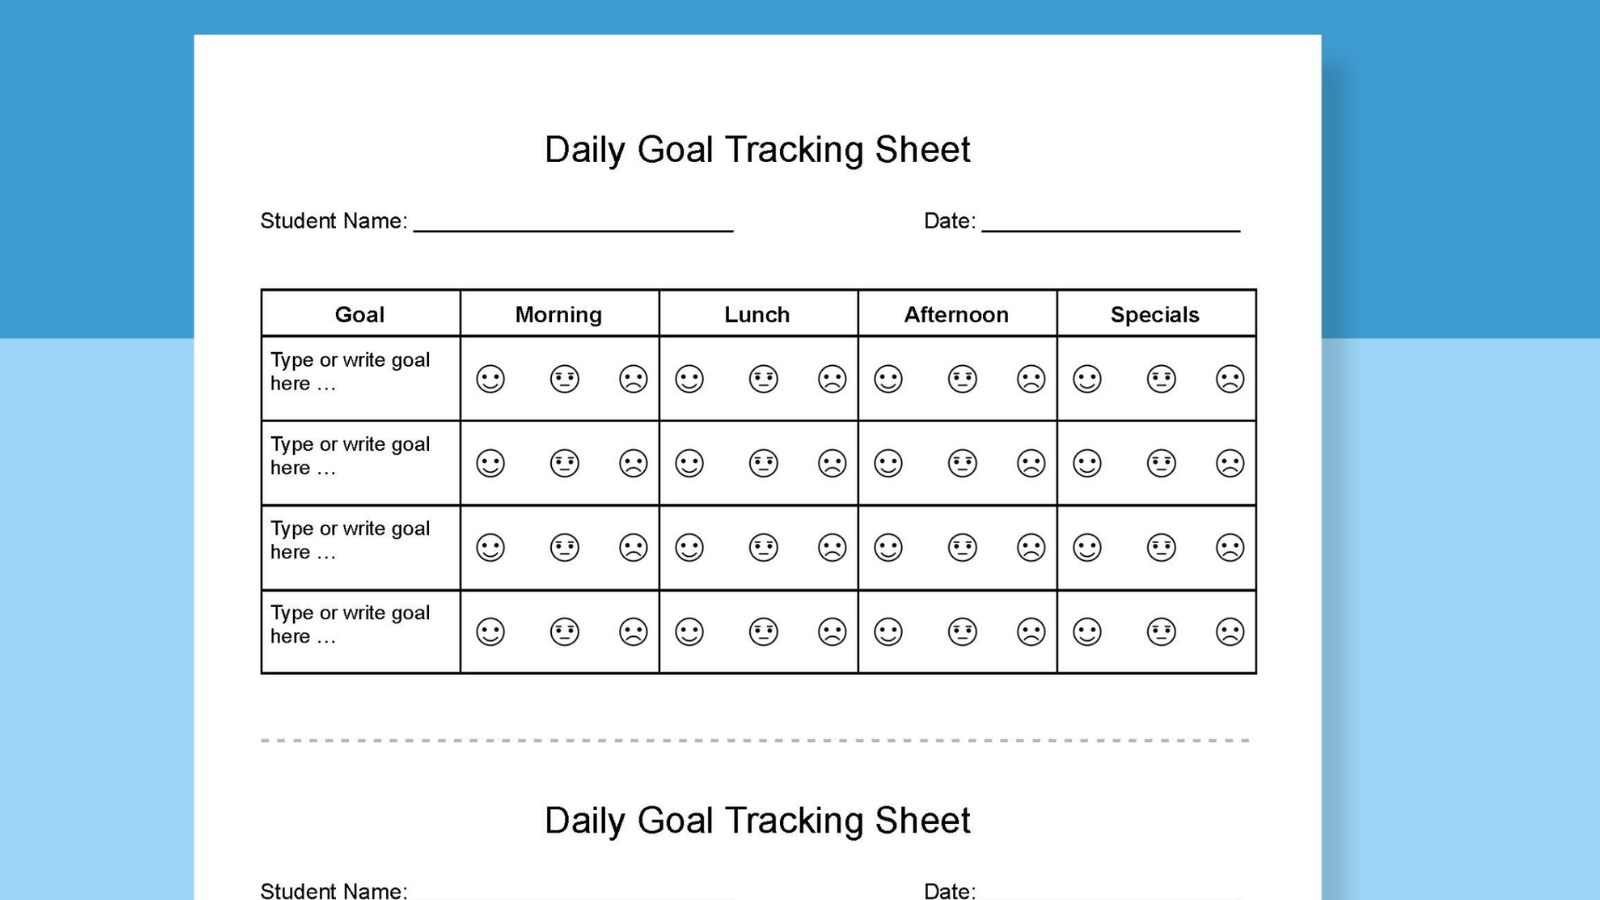 Daily goal tracking sheet.